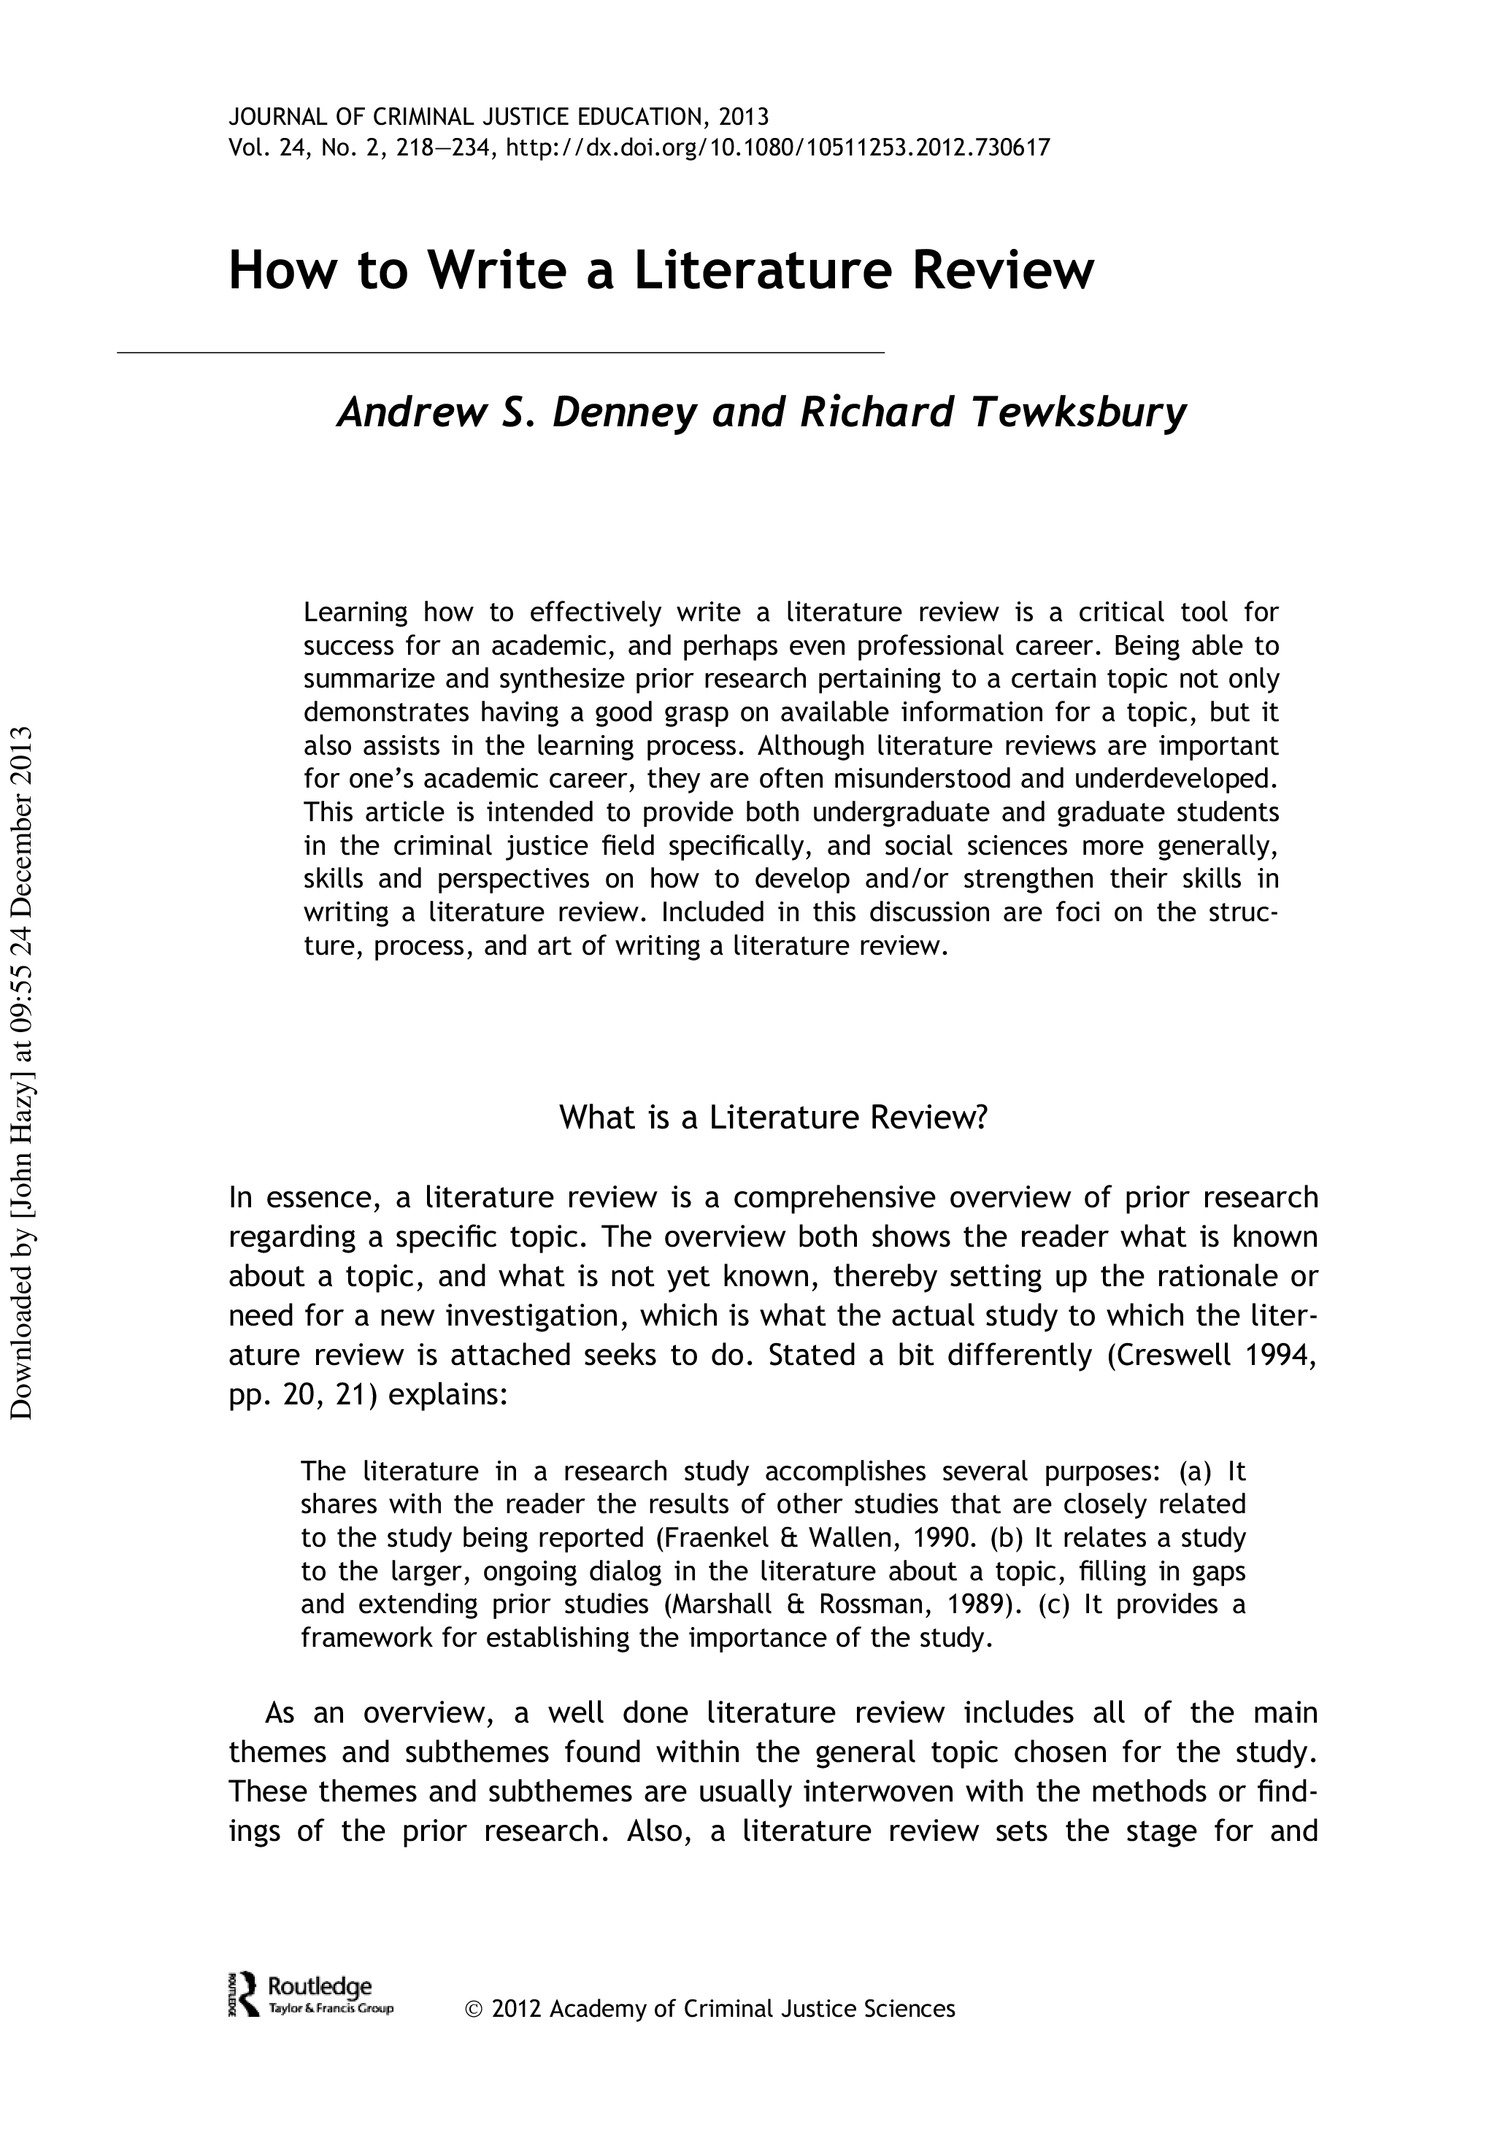 pdf what is literature review